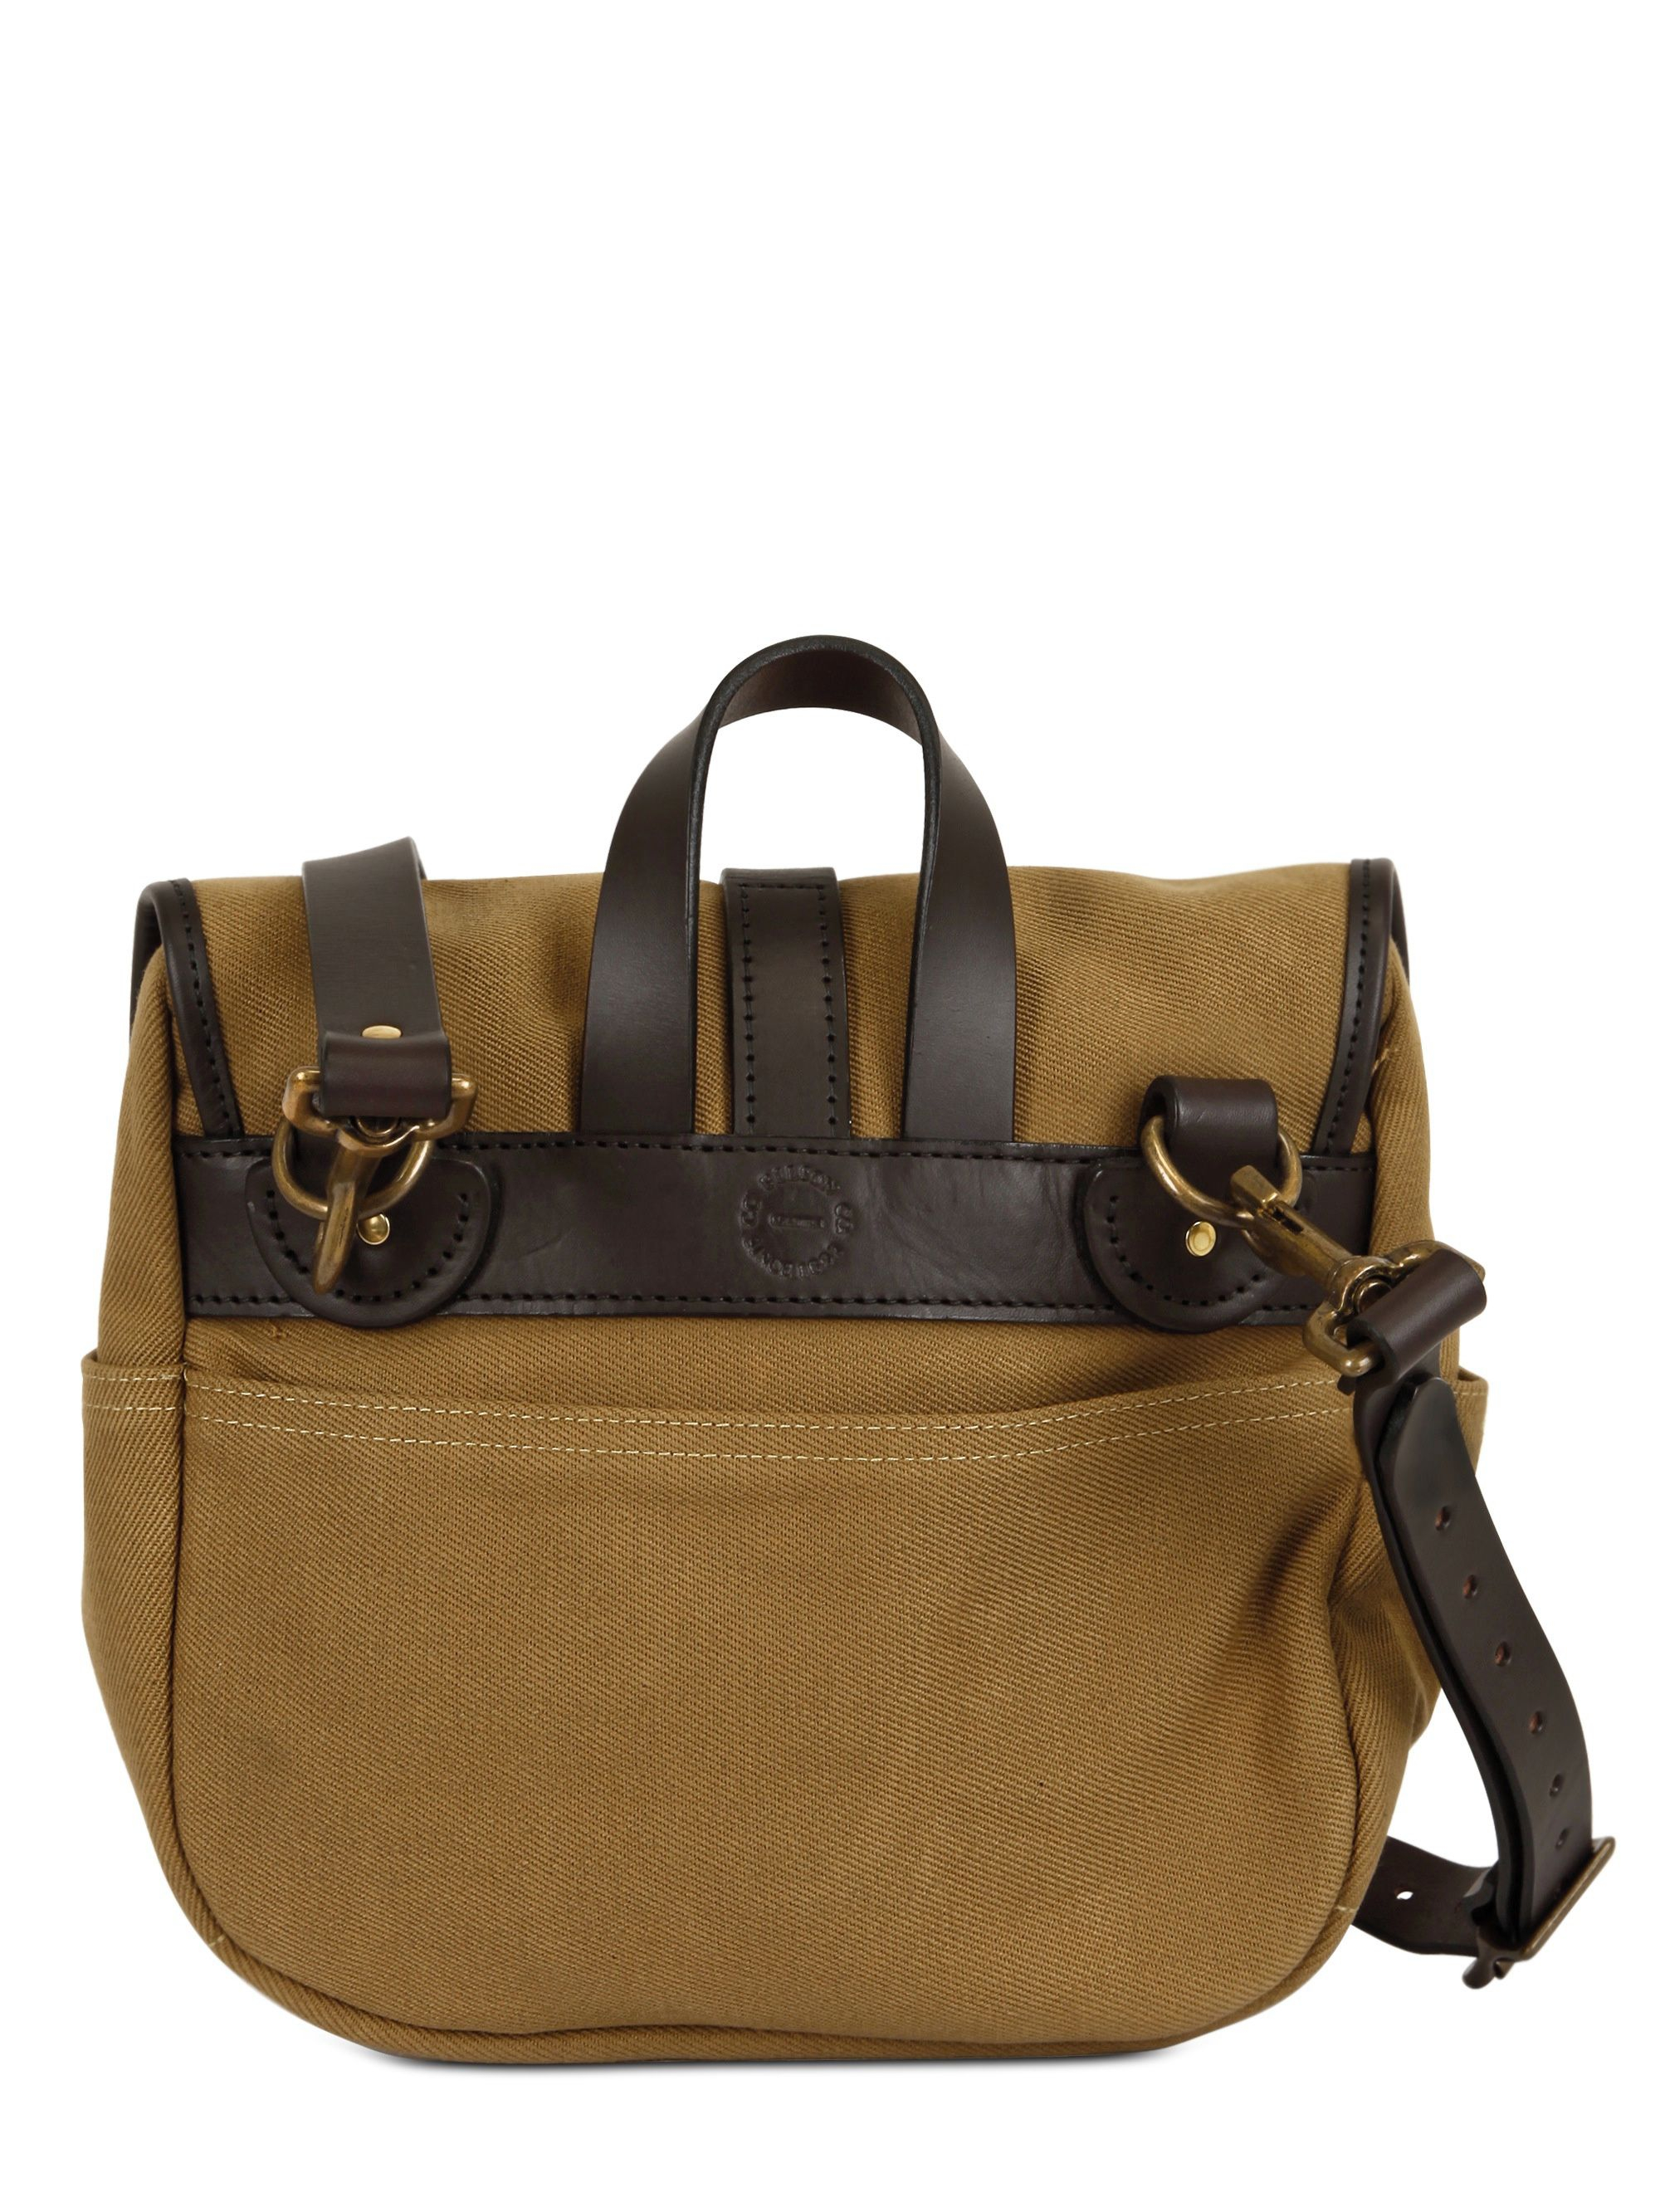 Filson Small Field Bag in Natural for Men - Lyst